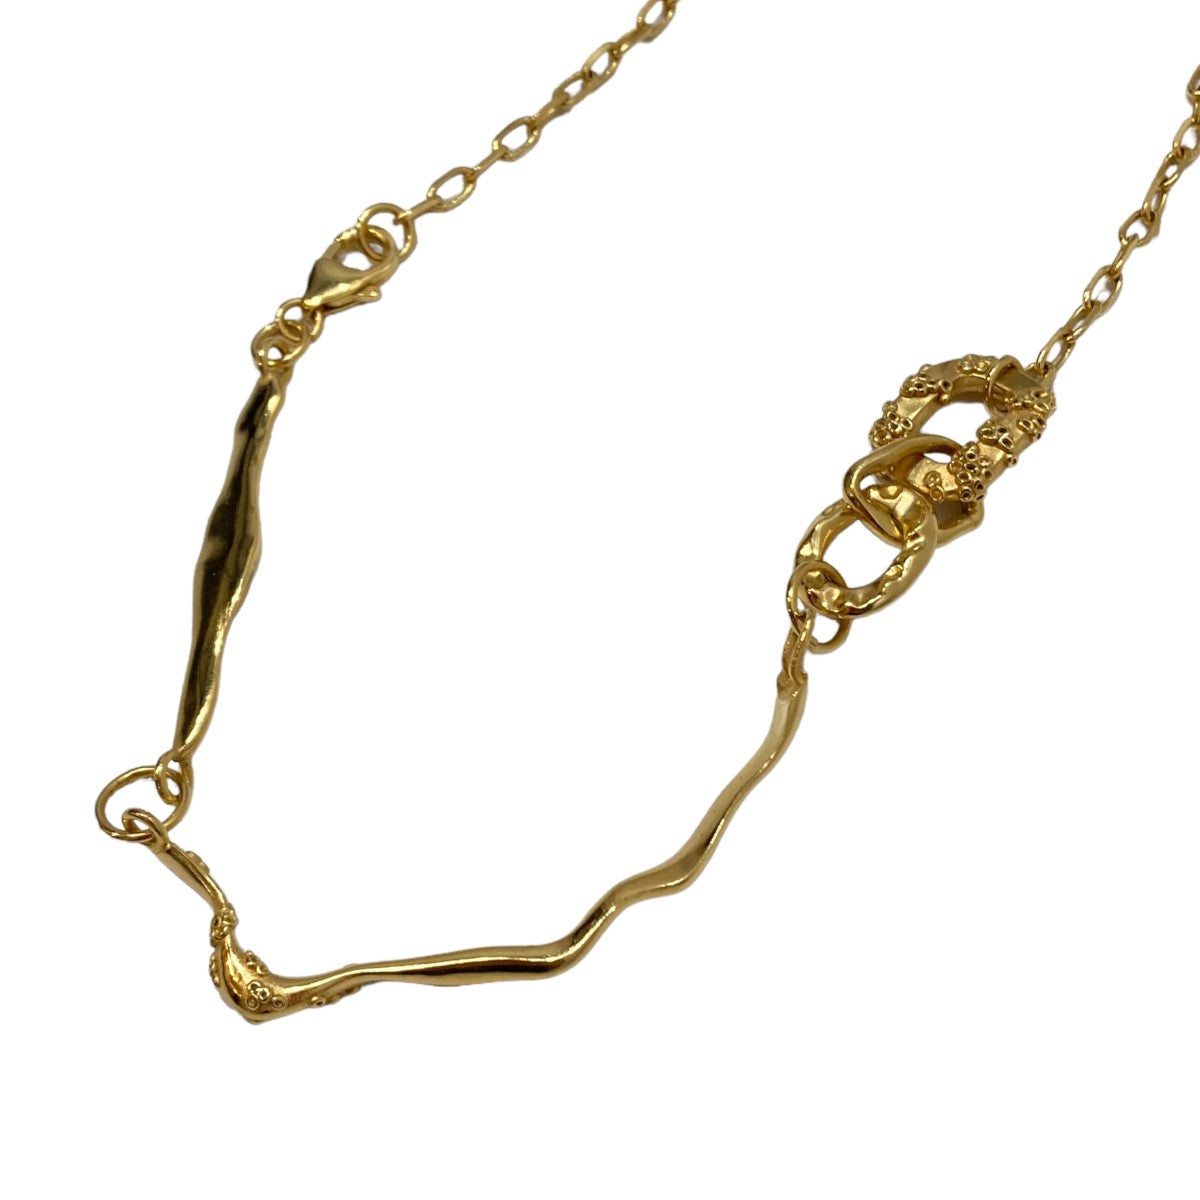 YOSTER(ヨースター) Cryptic Mind Necklace Gold ゴールドネックレス